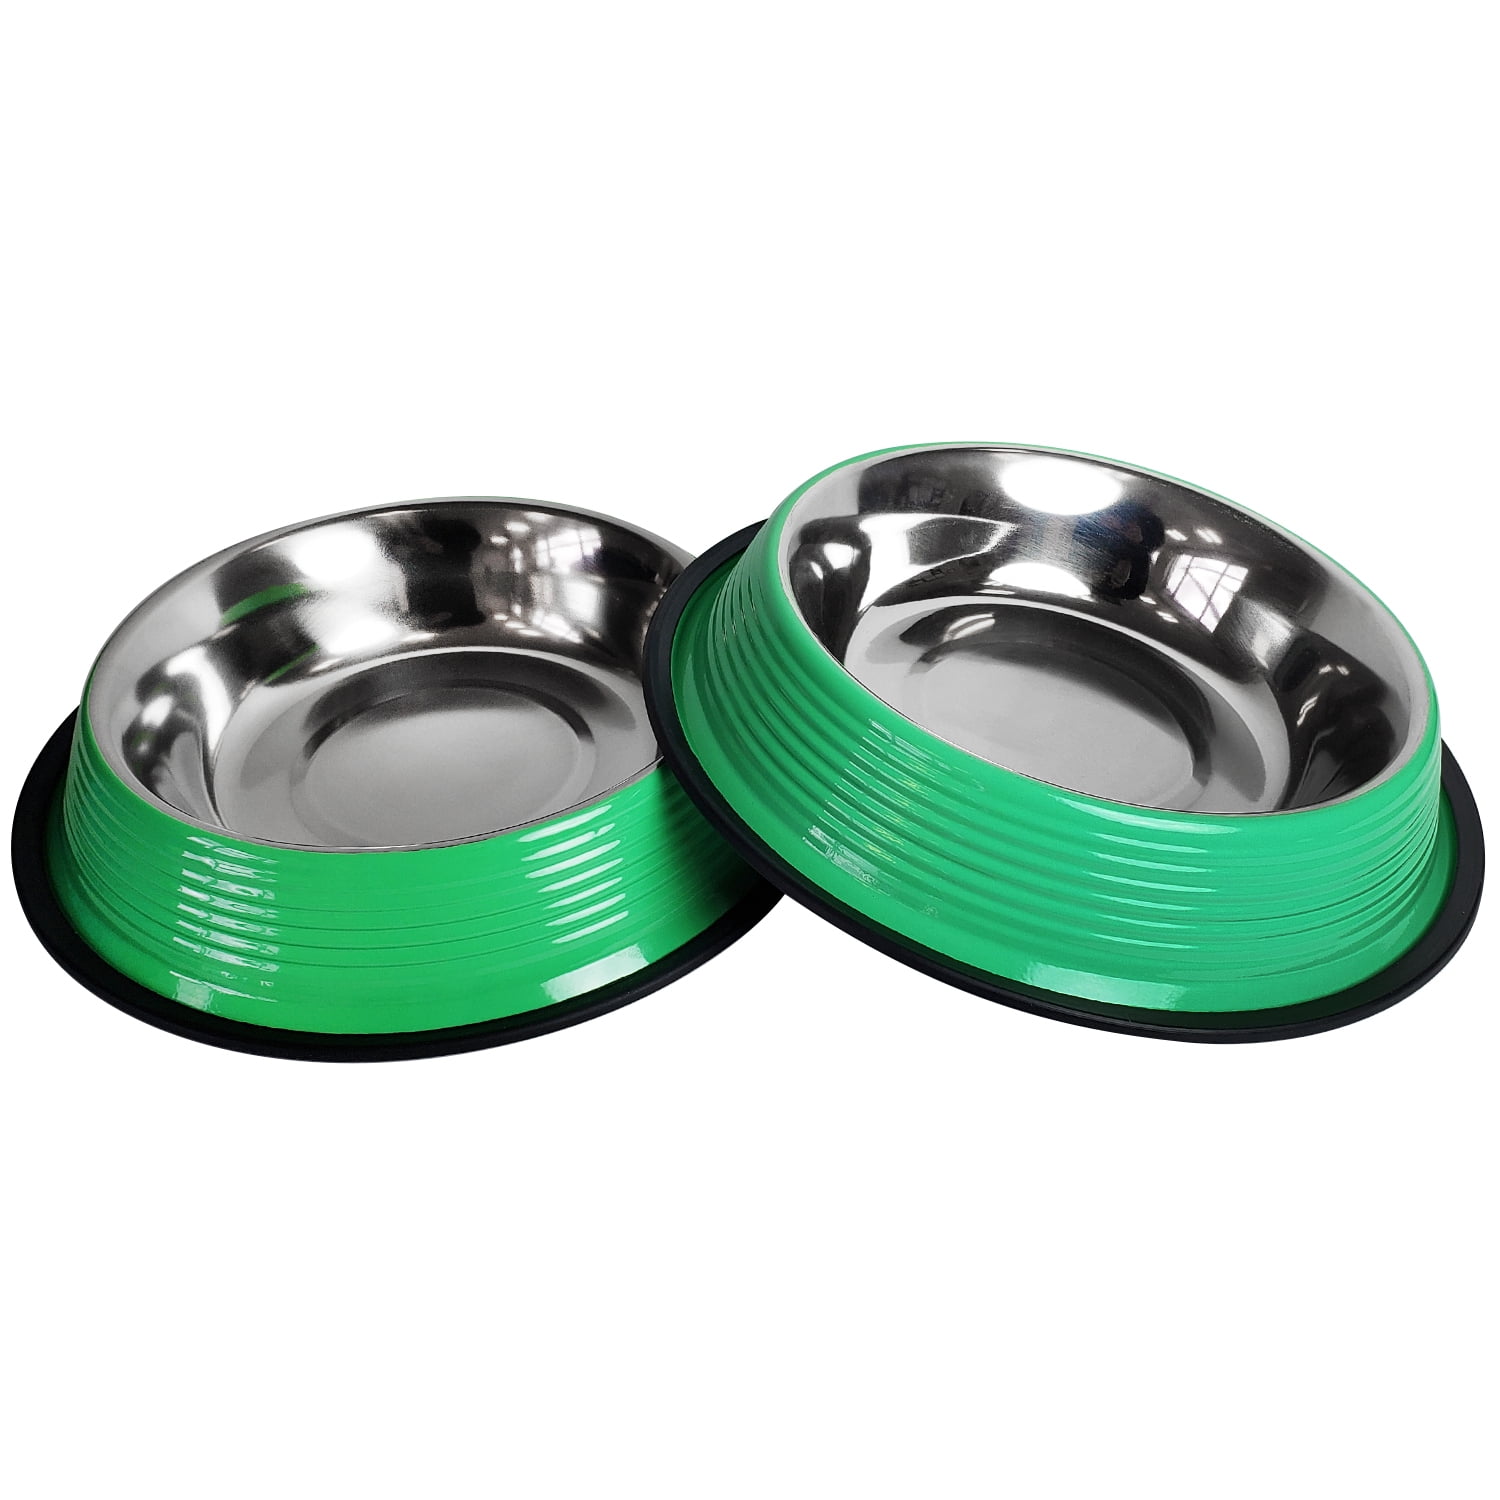 PetSafe Double Layer Stainless Steel Dog Bowl 64oz Capacity, Inside &  Outside Basin, Non Skid Base & Rust Resistant Design. Perfect For Large Dogs  & Pets. From Tina310, $11.73